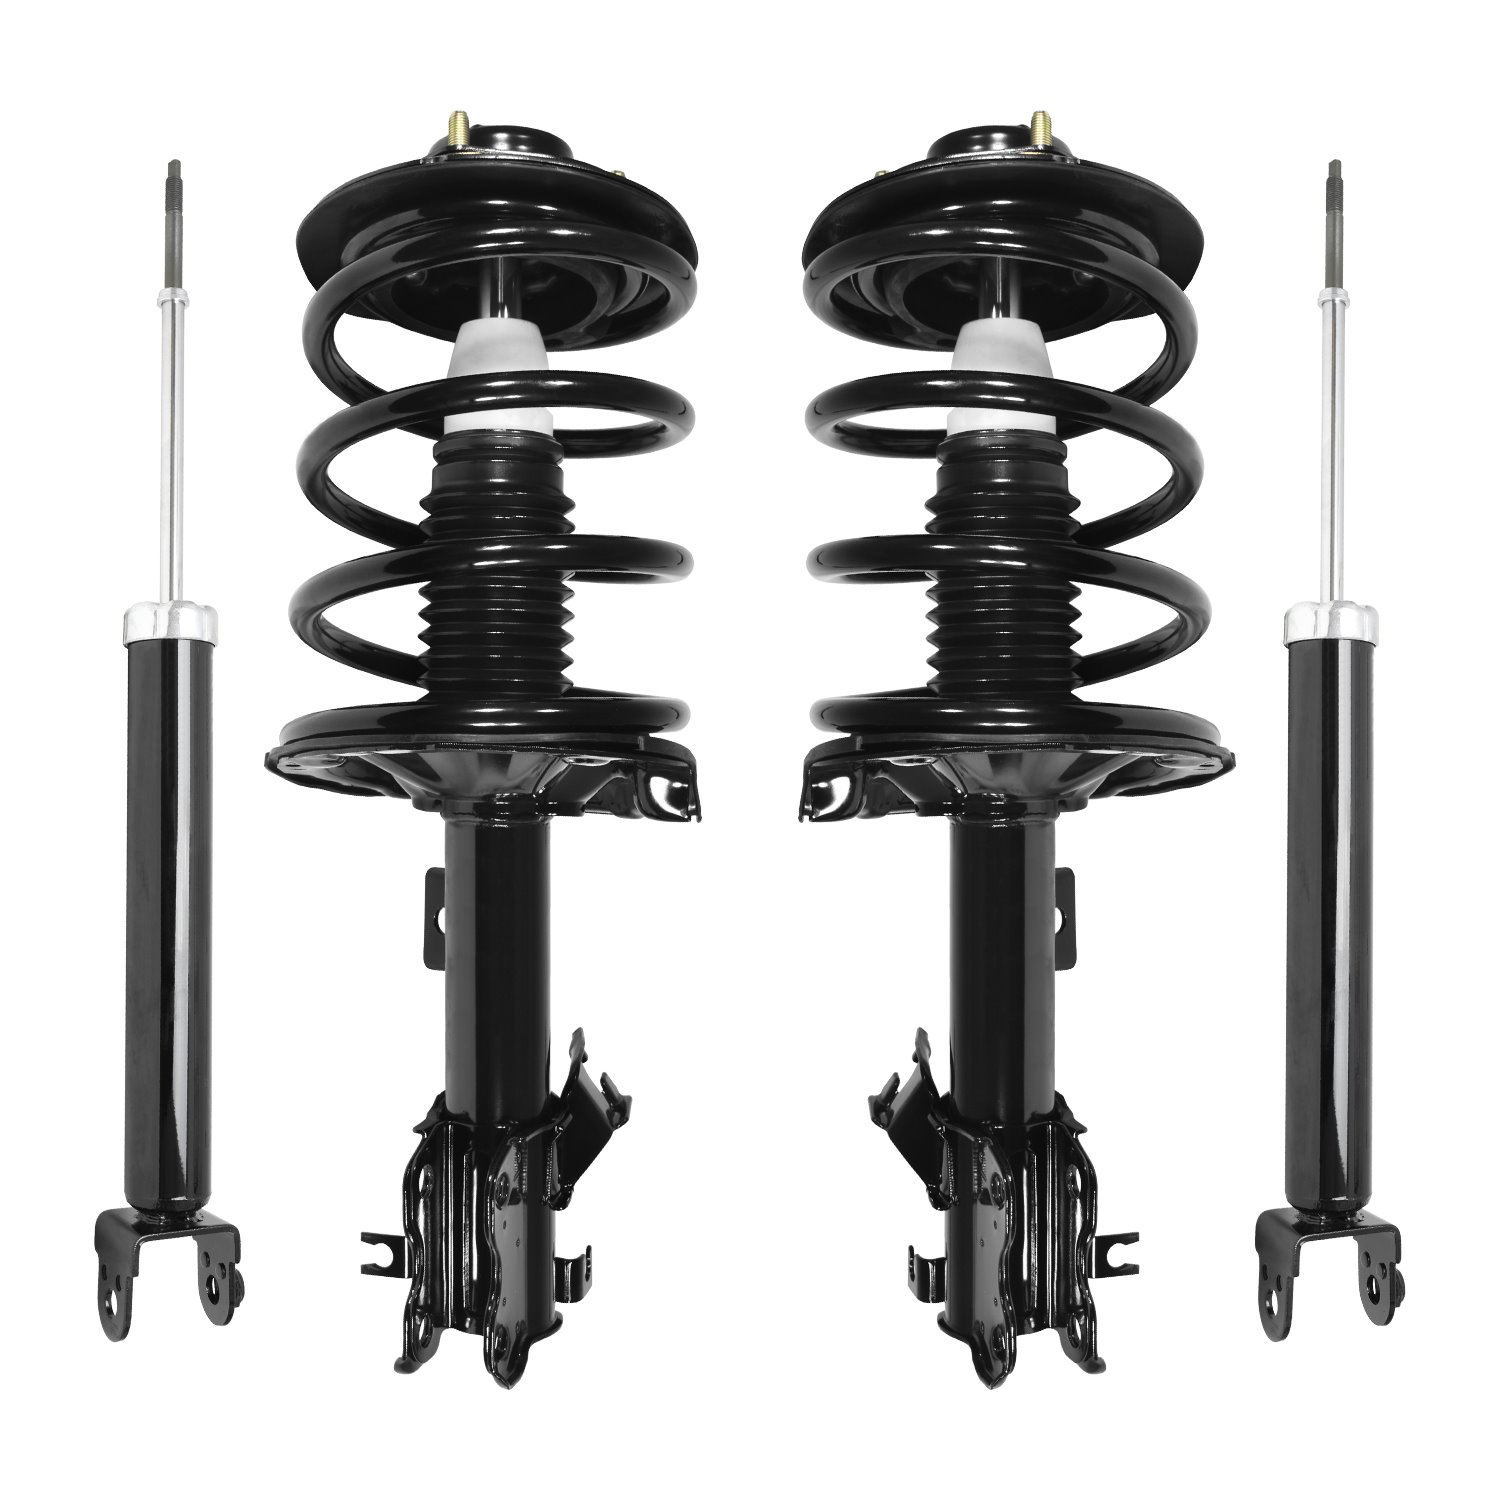 4-11593-255010-001 Front & Rear Suspension Strut & Coil Spring Assembly Fits Select Nissan Altima